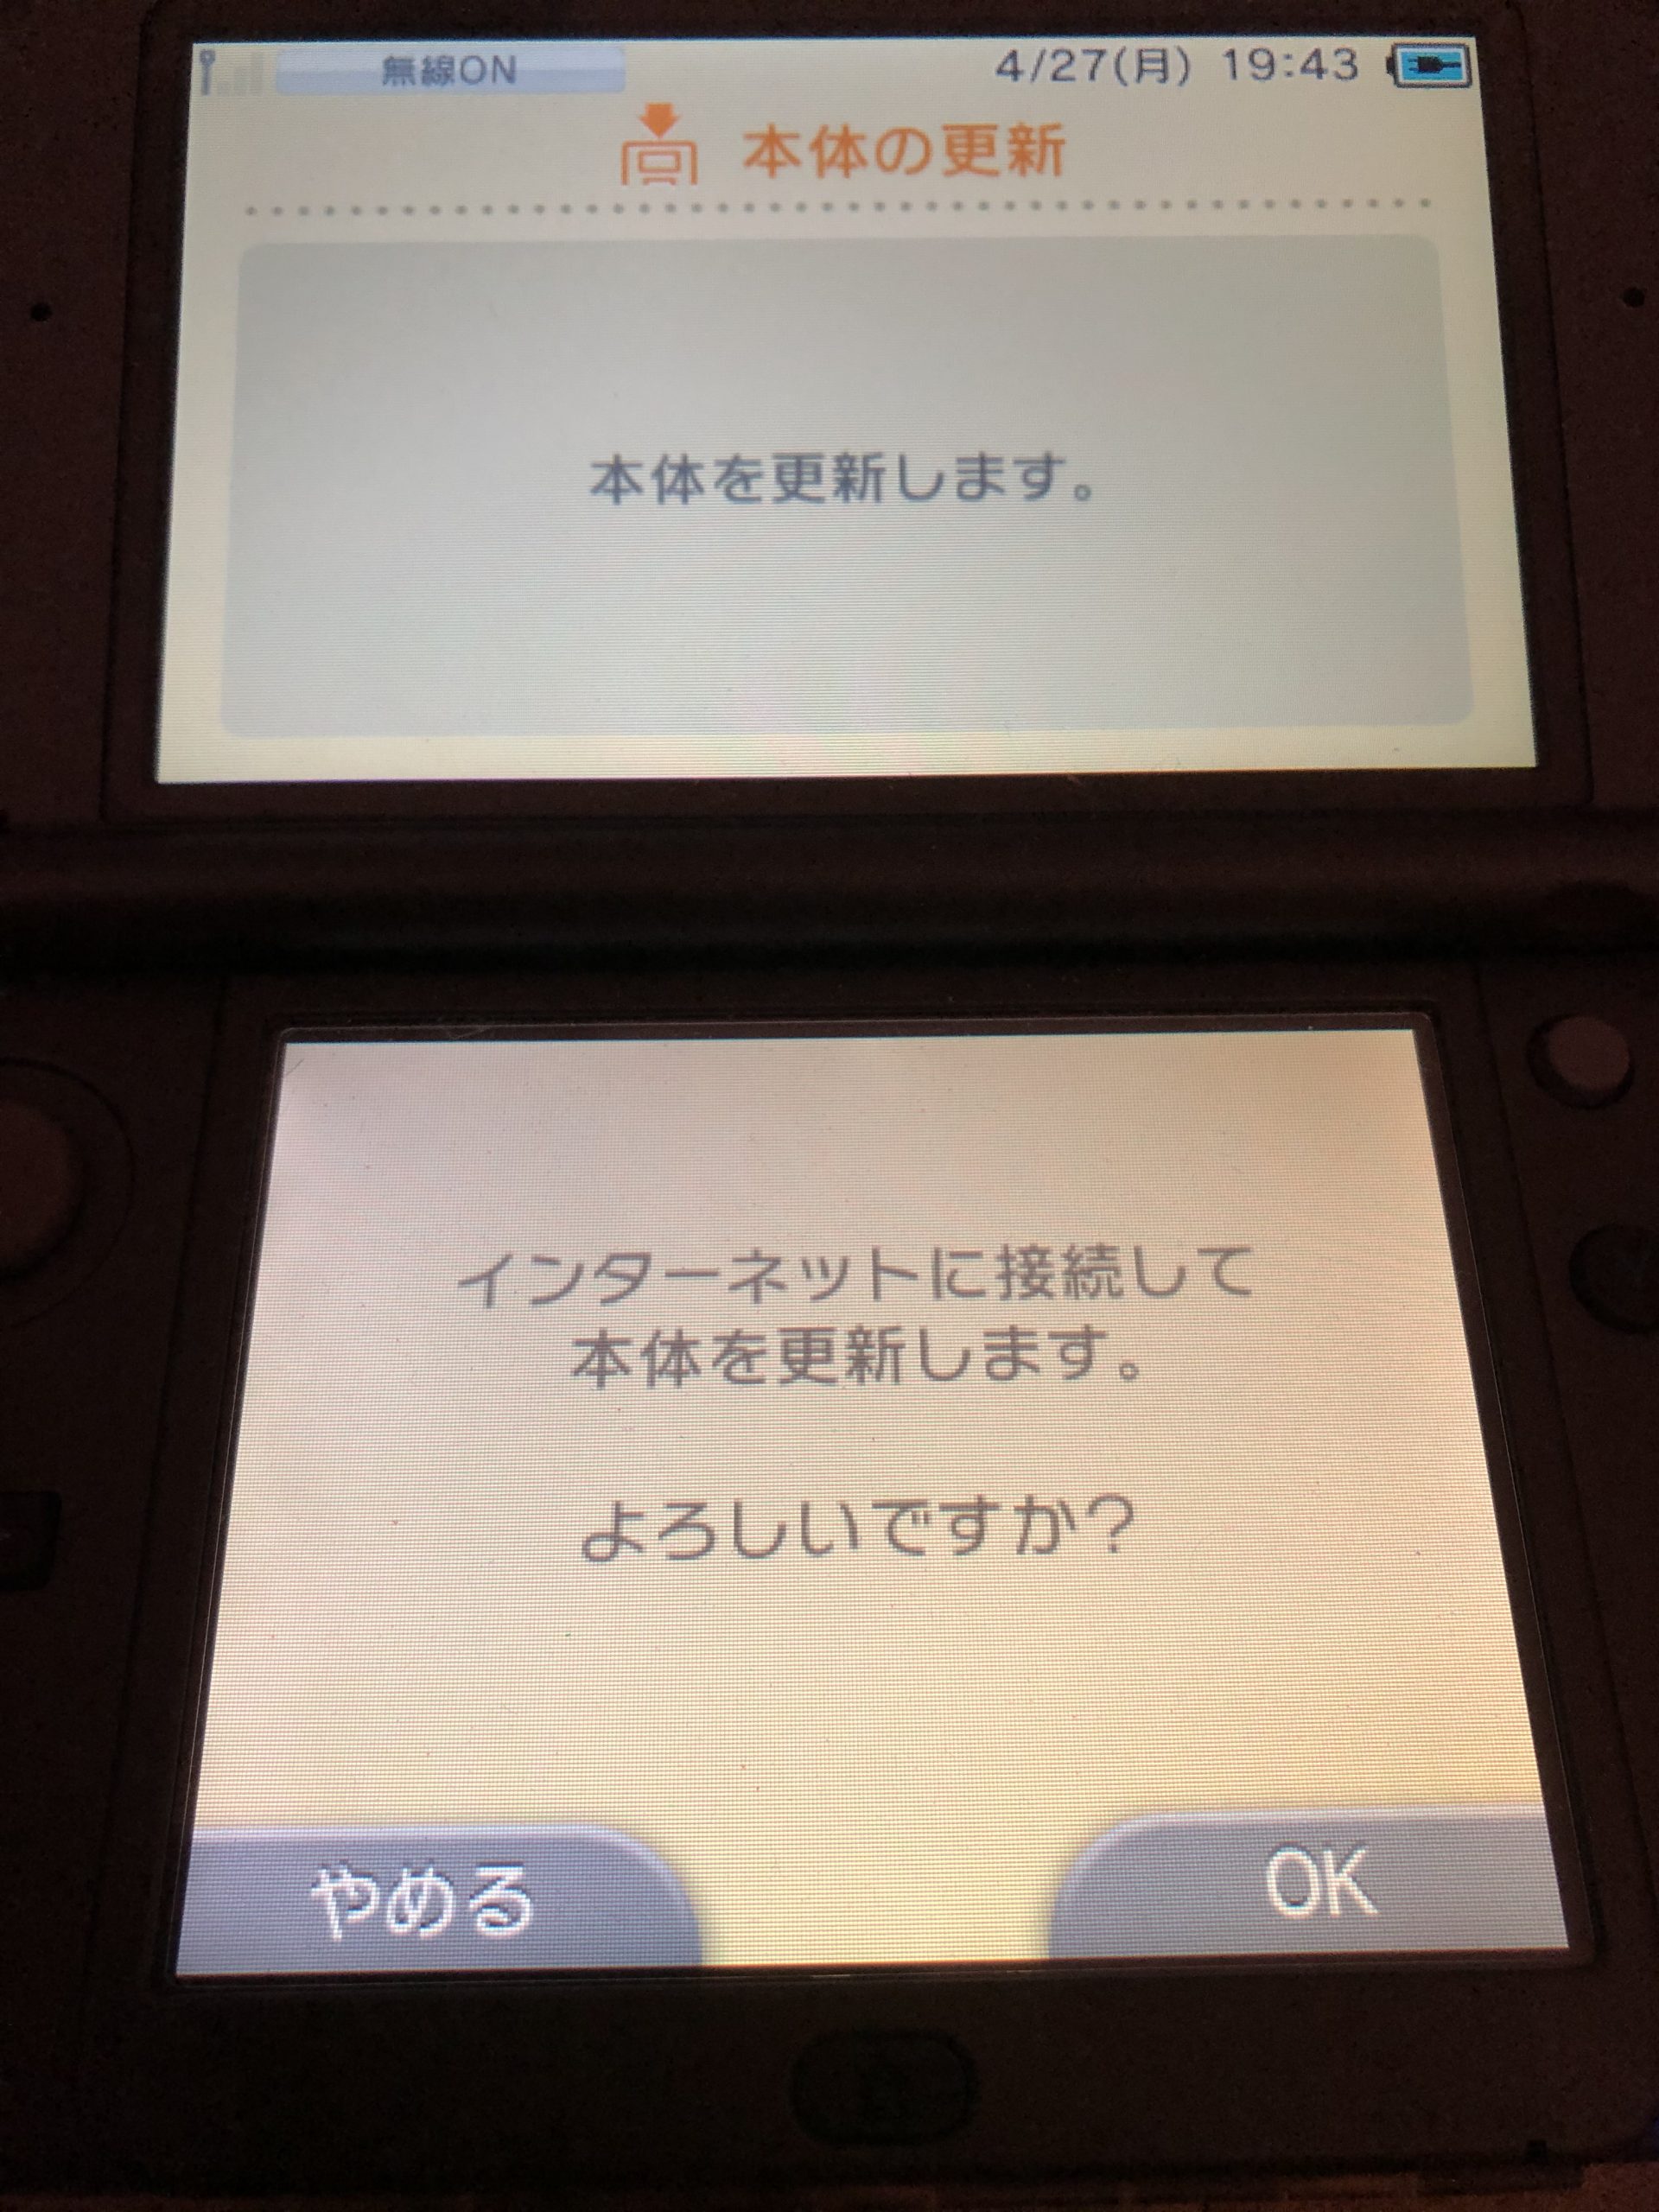 Old3ds 2dsでもhomebrew Launcher起動が可能に Old Browserhax By Zoogie 大人のためのゲーム講座